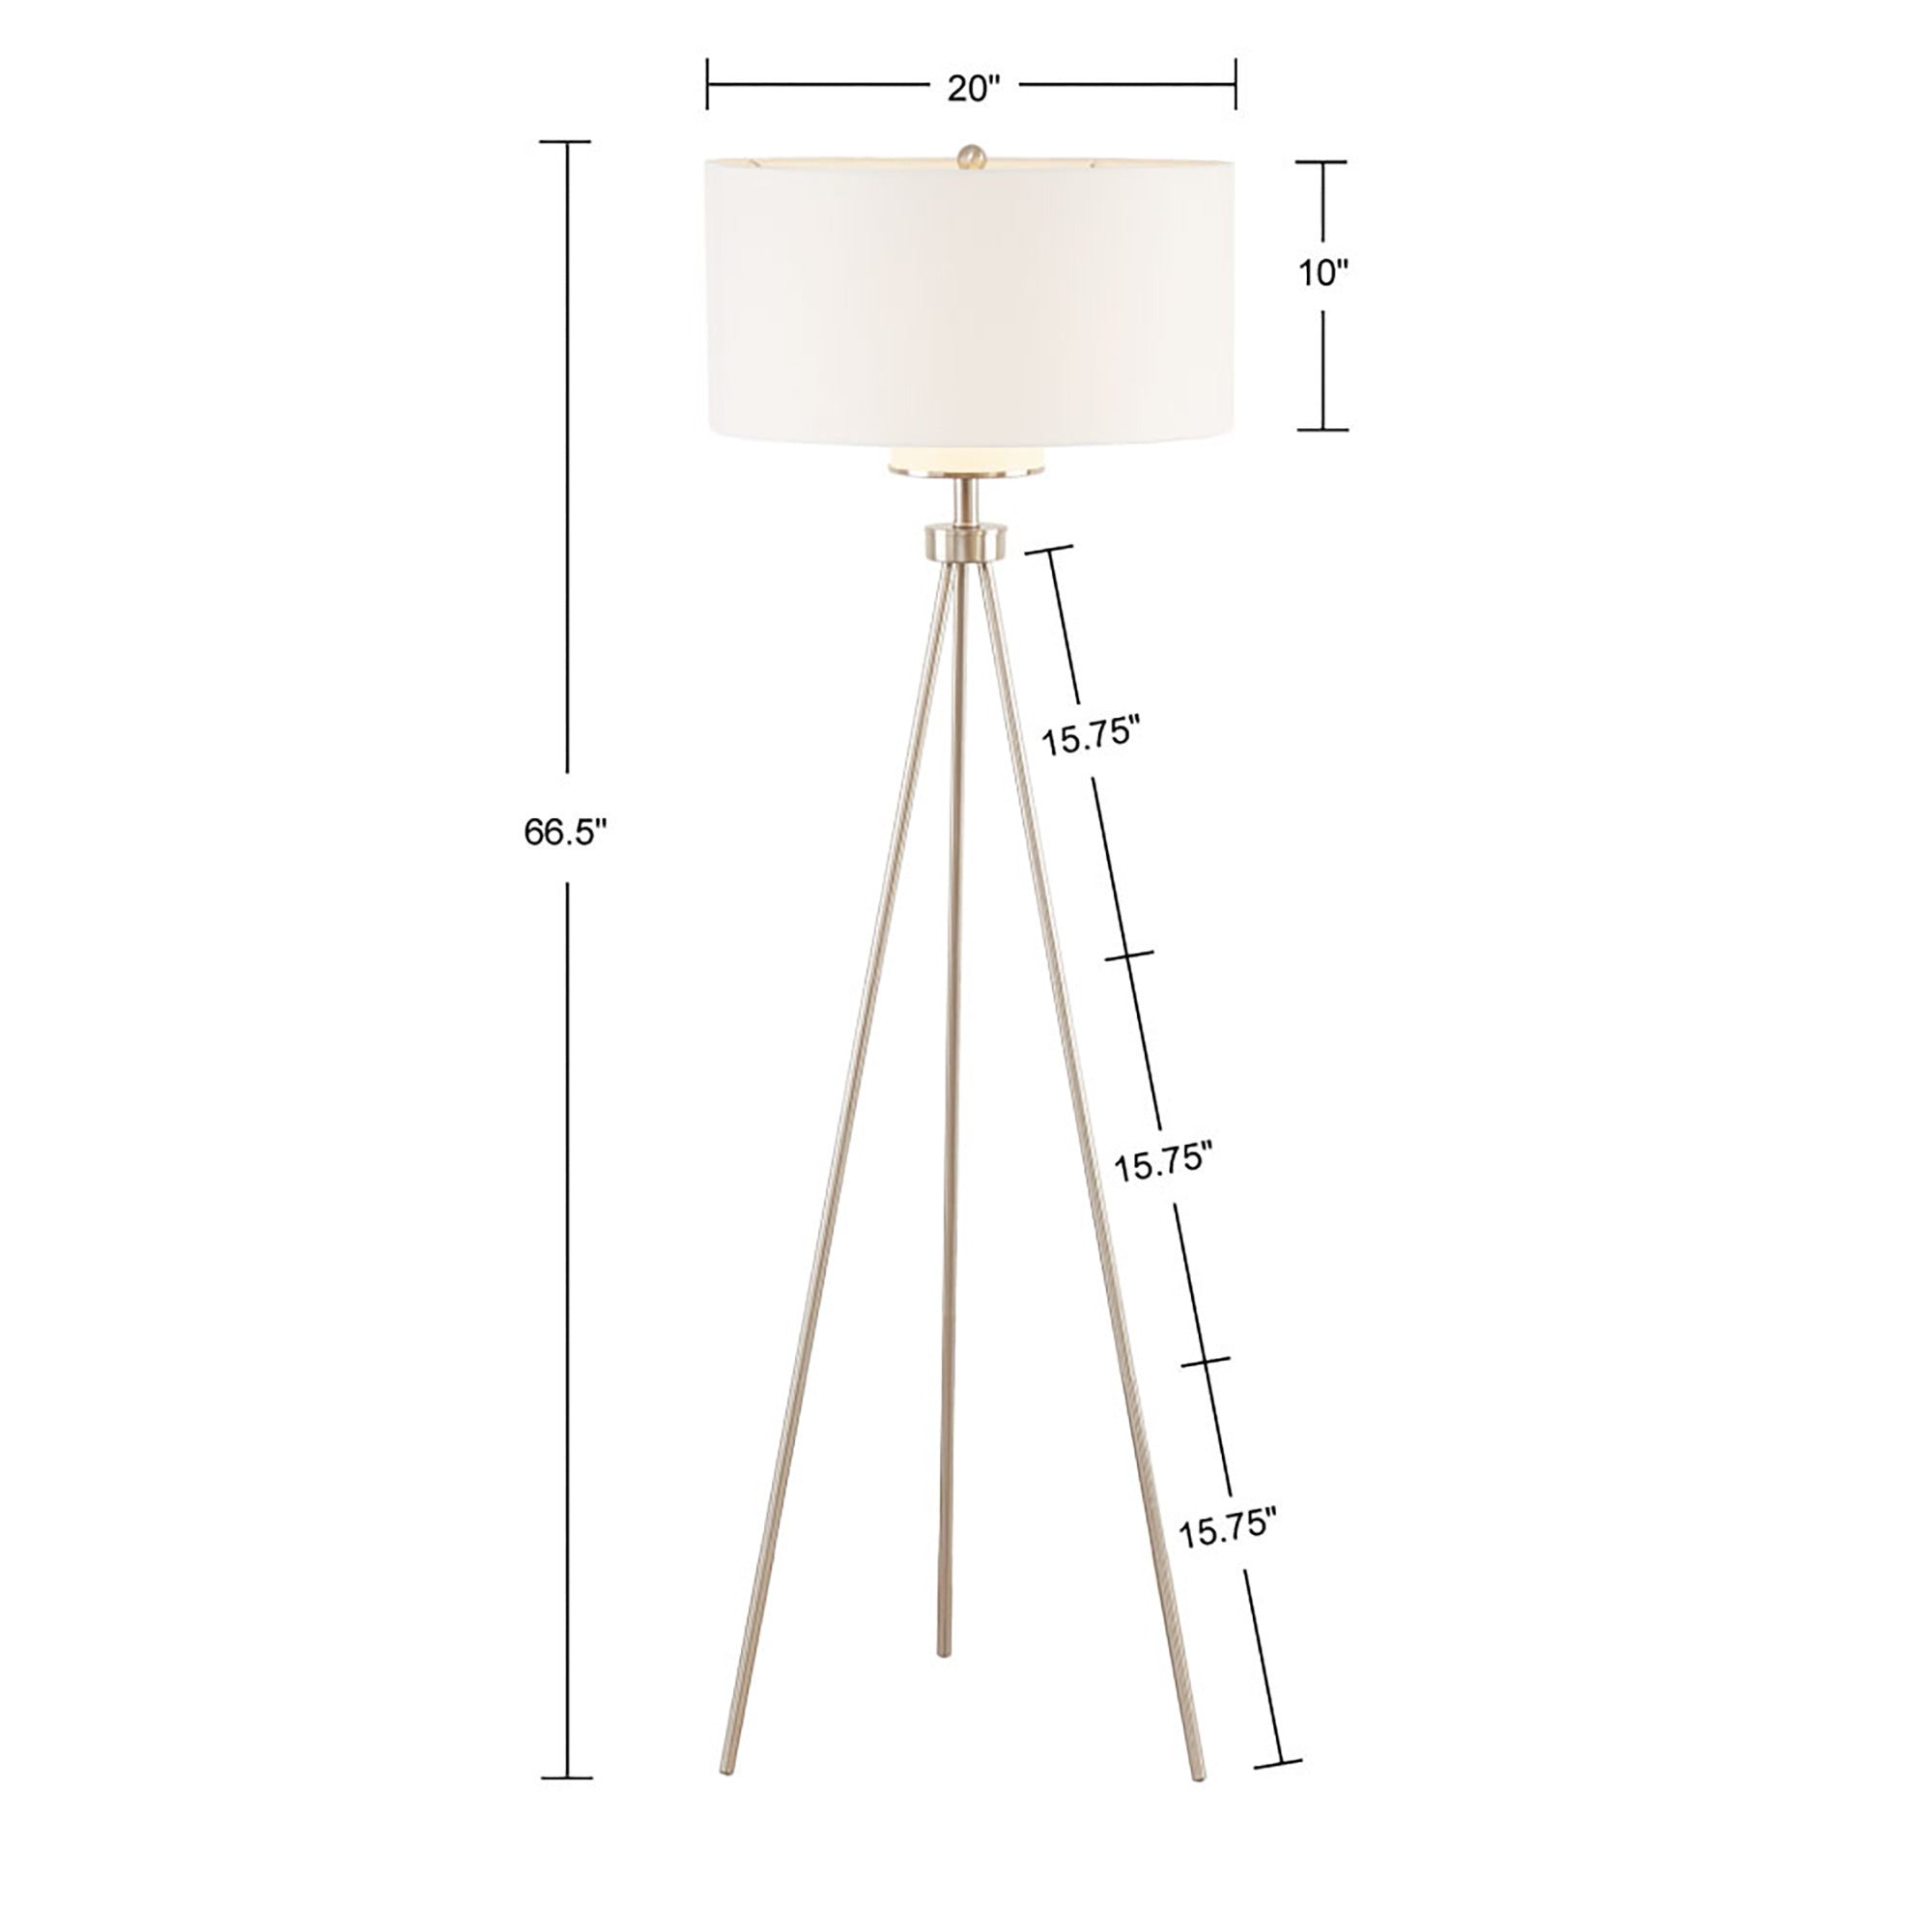 Pacific Tripod Metal Tripod Floor Lamp with Glass Shade - Silver